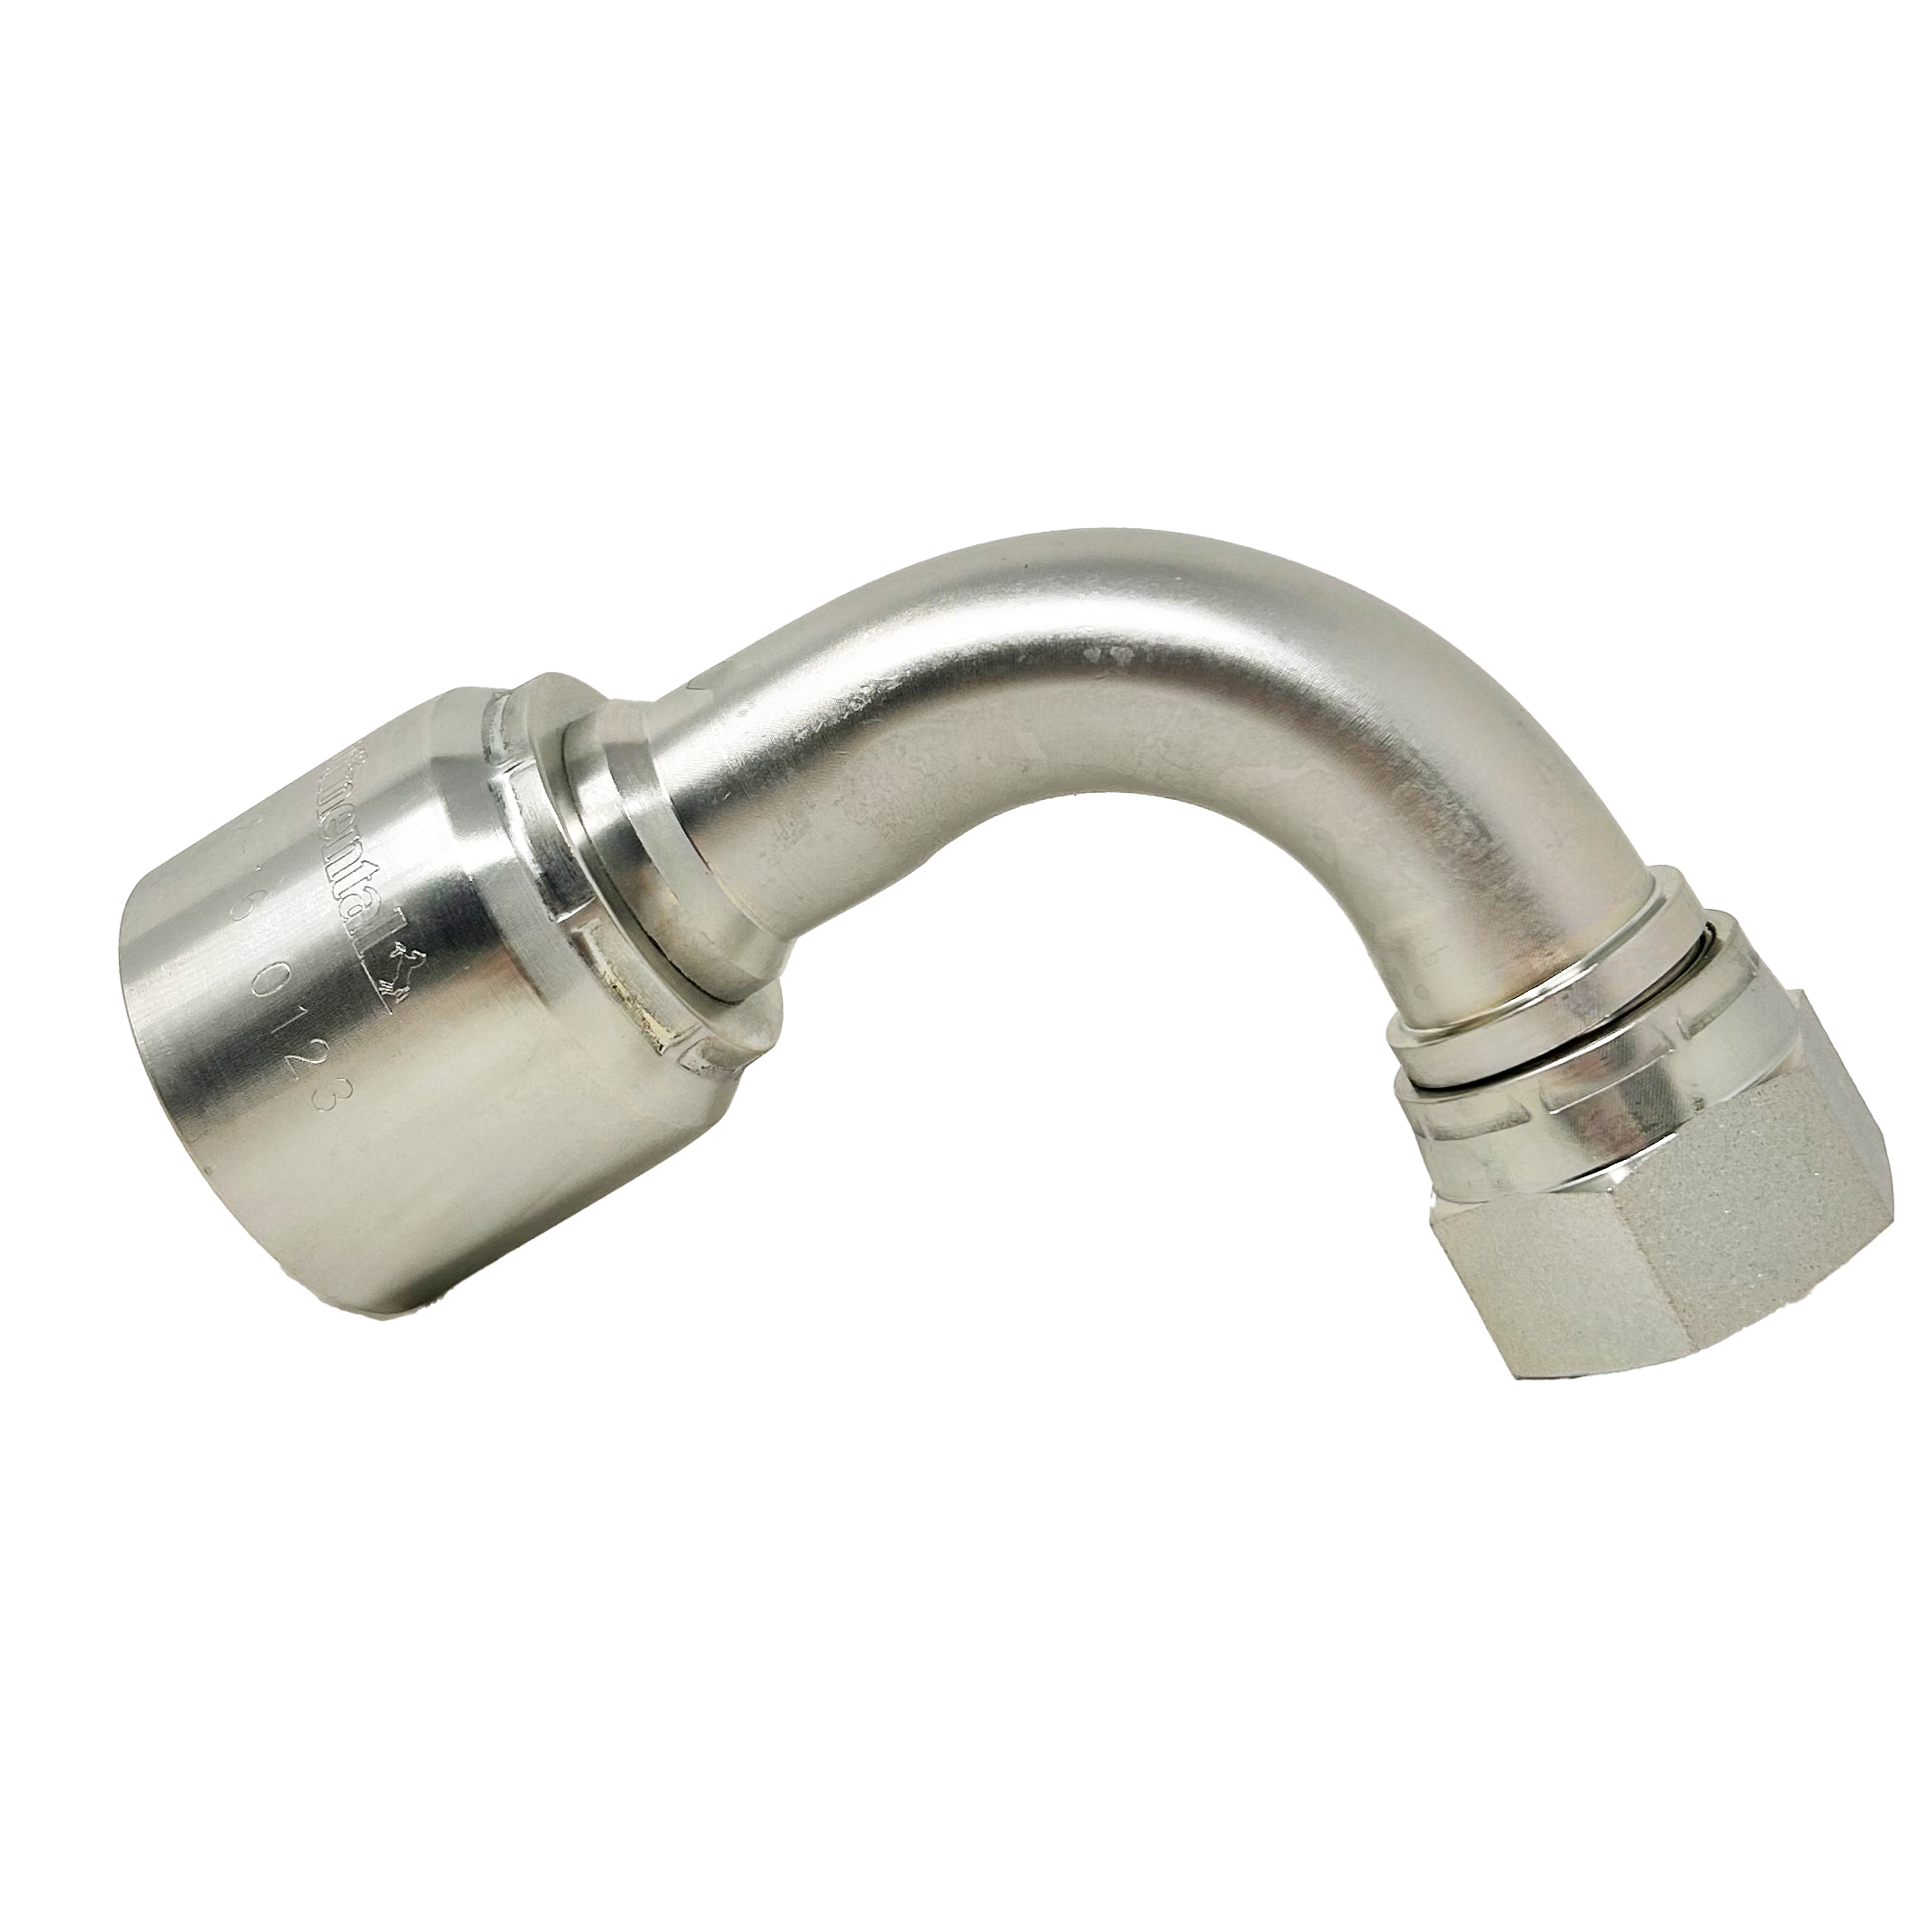 B2-JCFX90-1616: Continental Hose Fitting, 1" Hose ID x 1-5/16-12 Female JIC, 90-Degree Swivel Connection